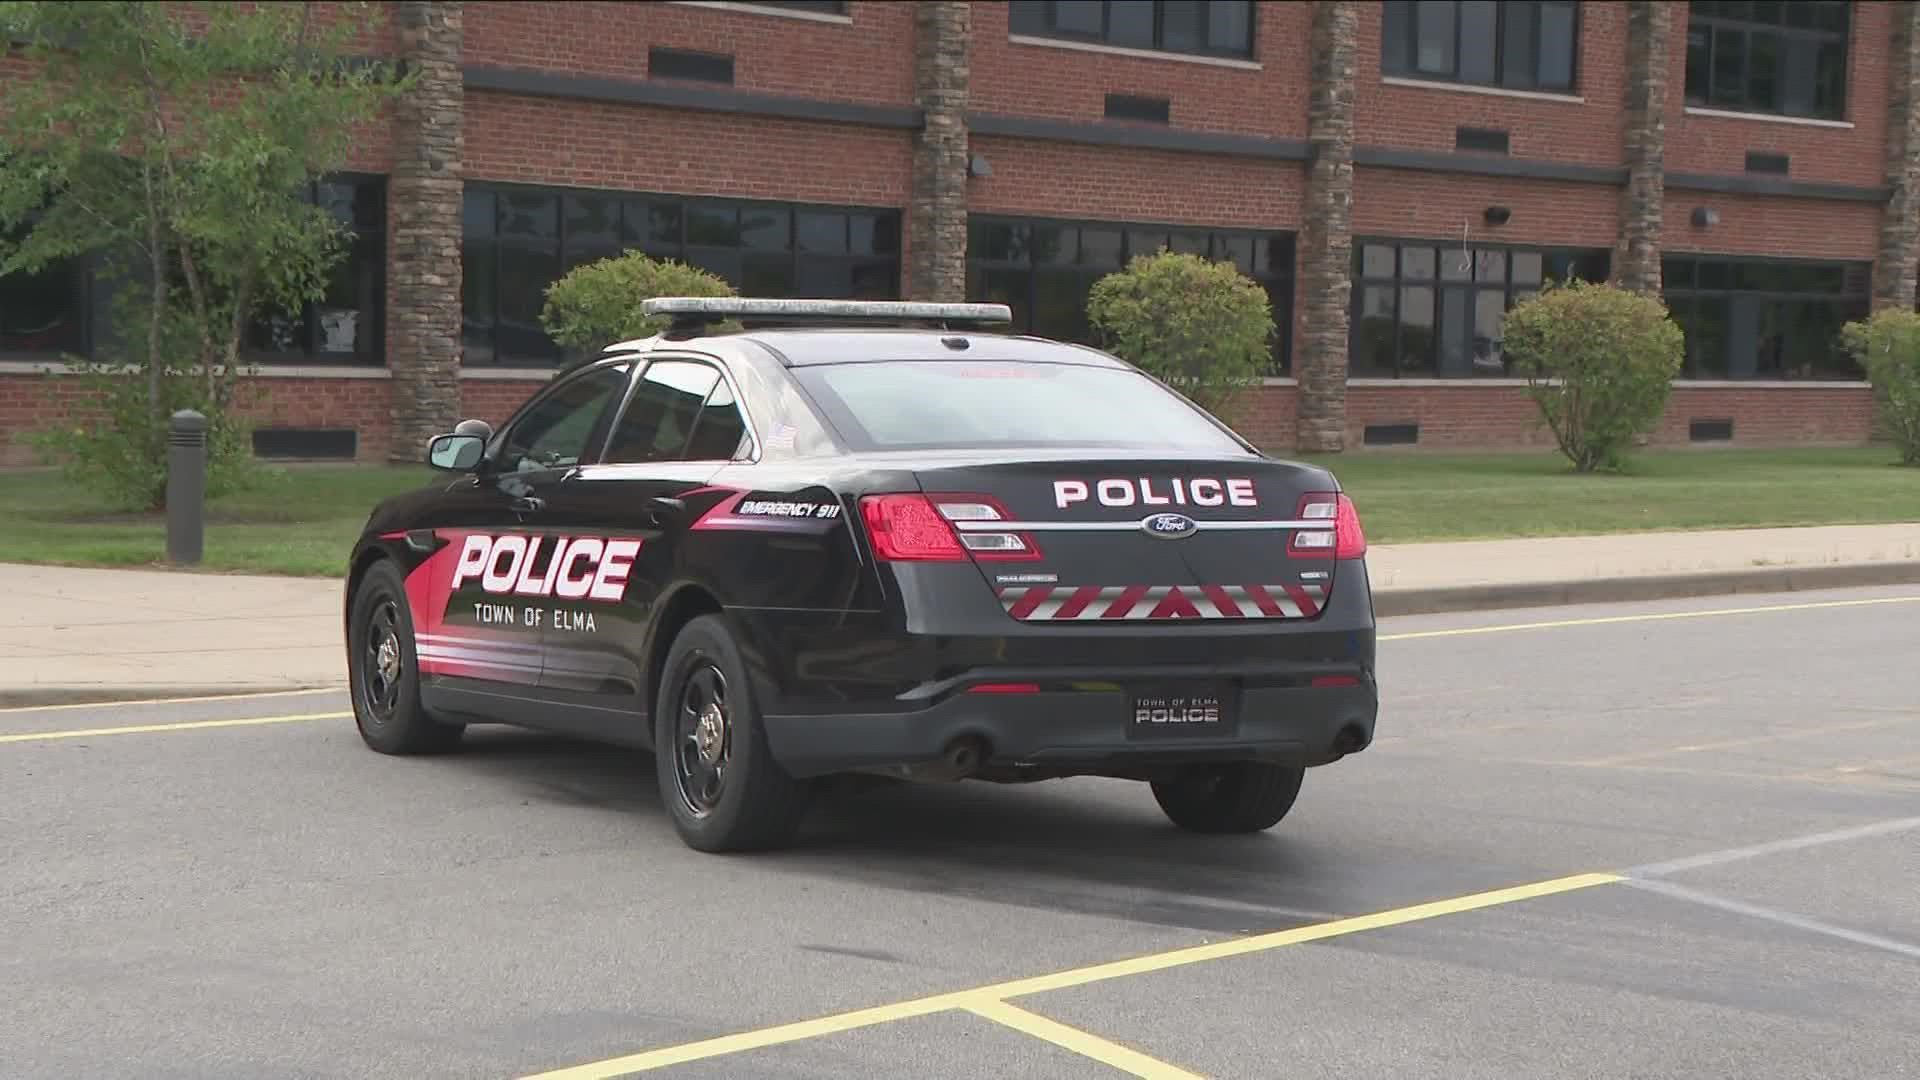 When school resumes next month... the Iroquois central School district will have a full-time school resource officer in every one of its school buildings.